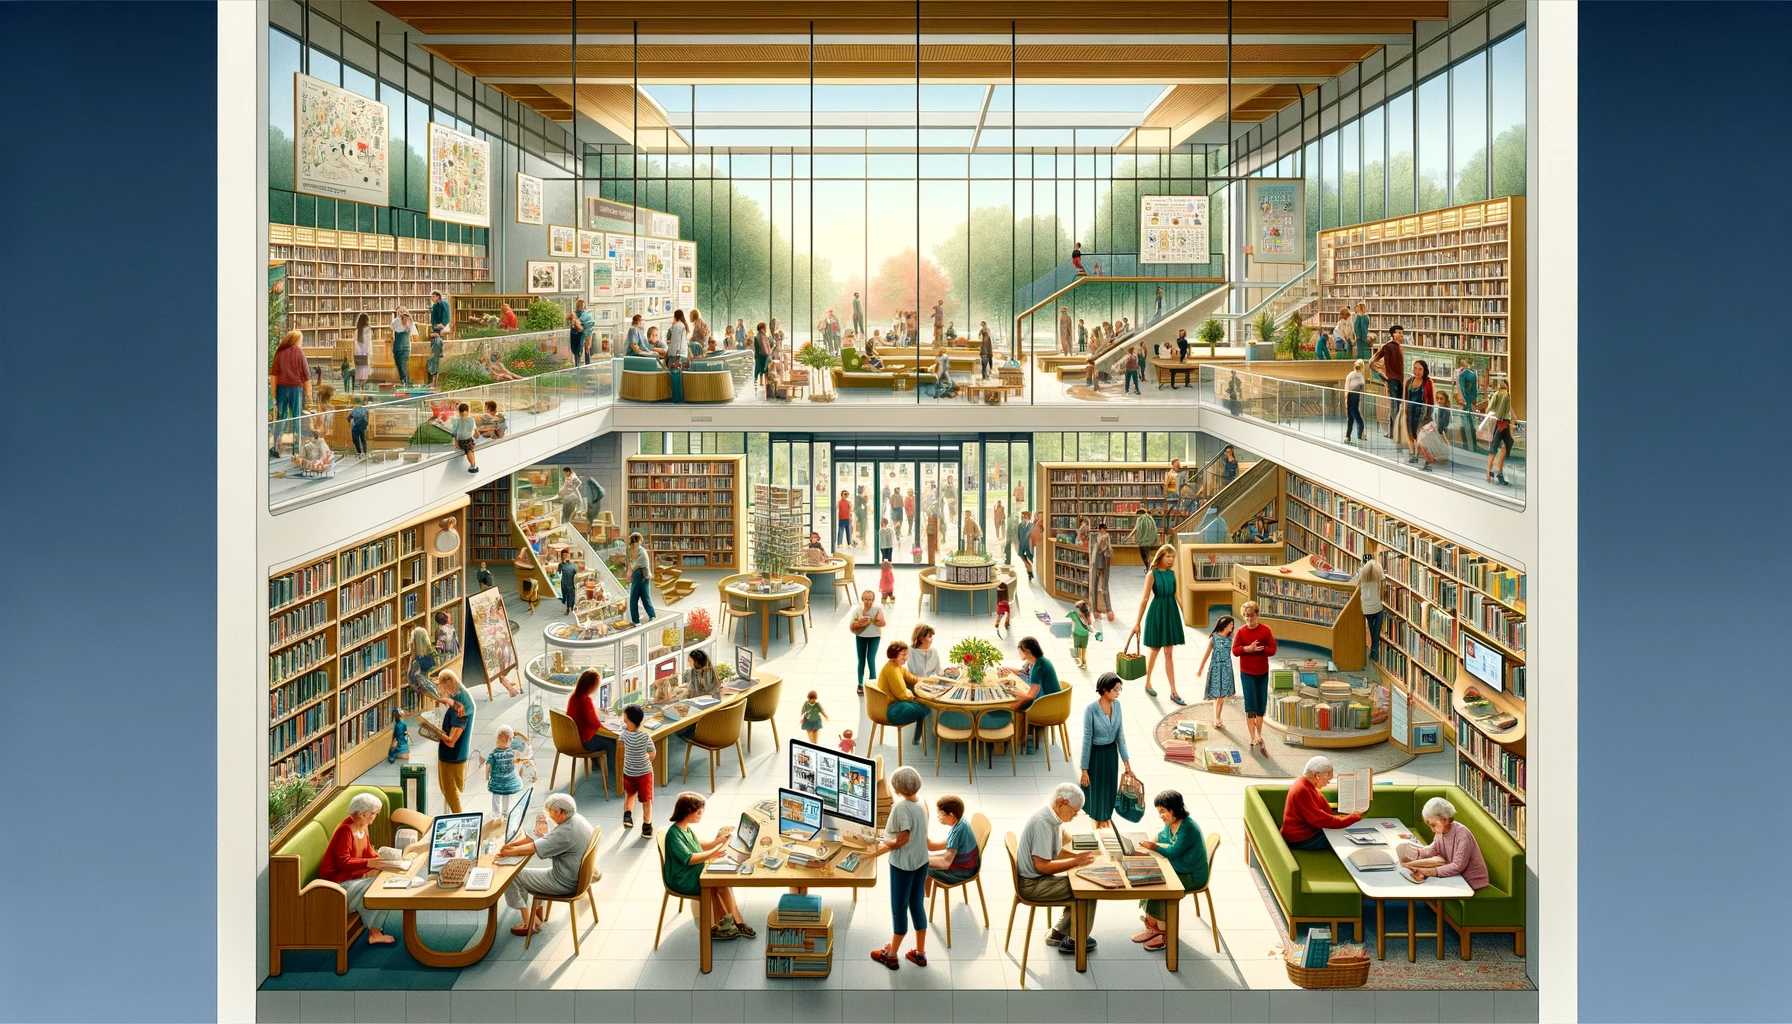 Beyond Bookshelves: The Enduring Role of Libraries in Society